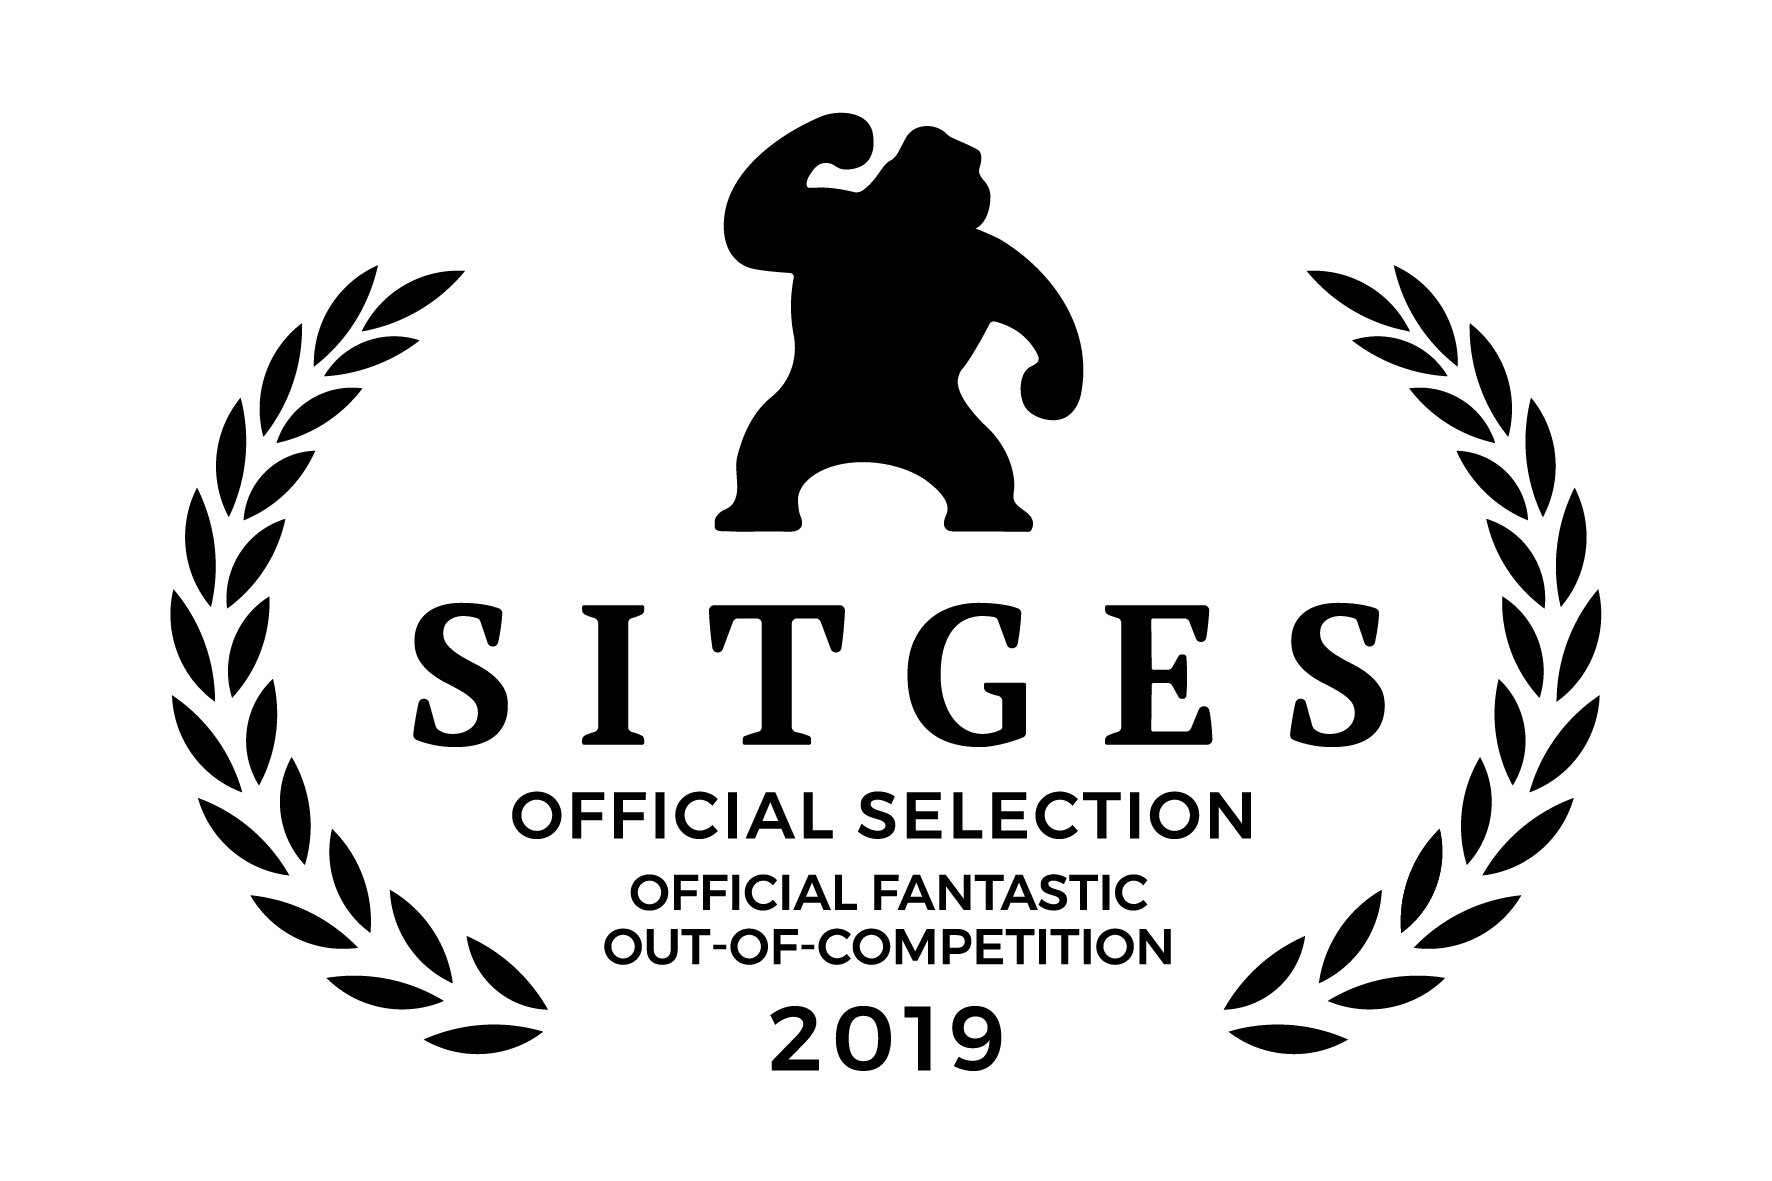 SITGES19_OfficialSelection_FantasticOutOfCompetition.jpg